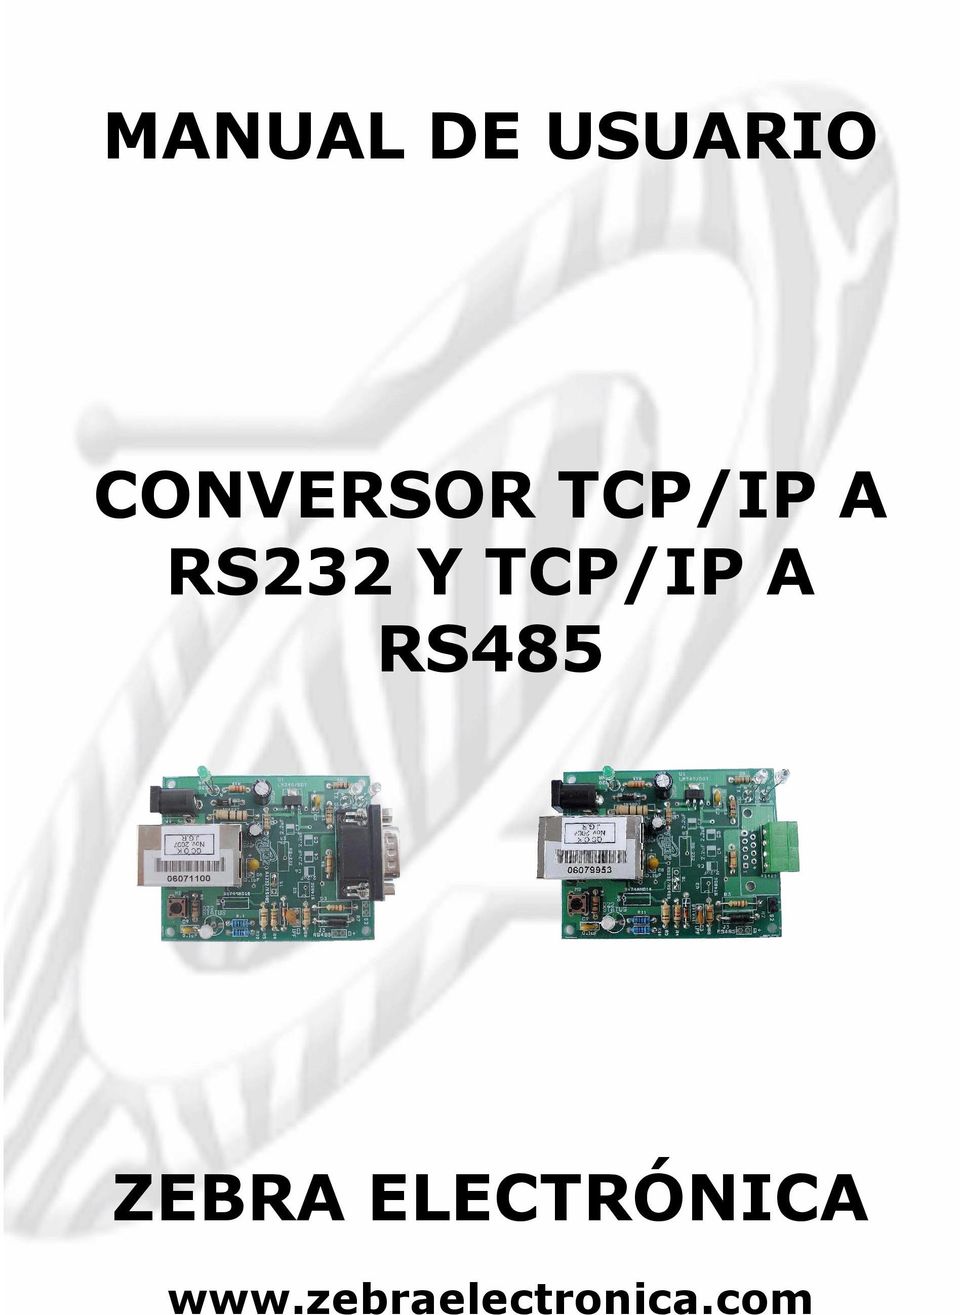 RS232 Y TCP/IP A